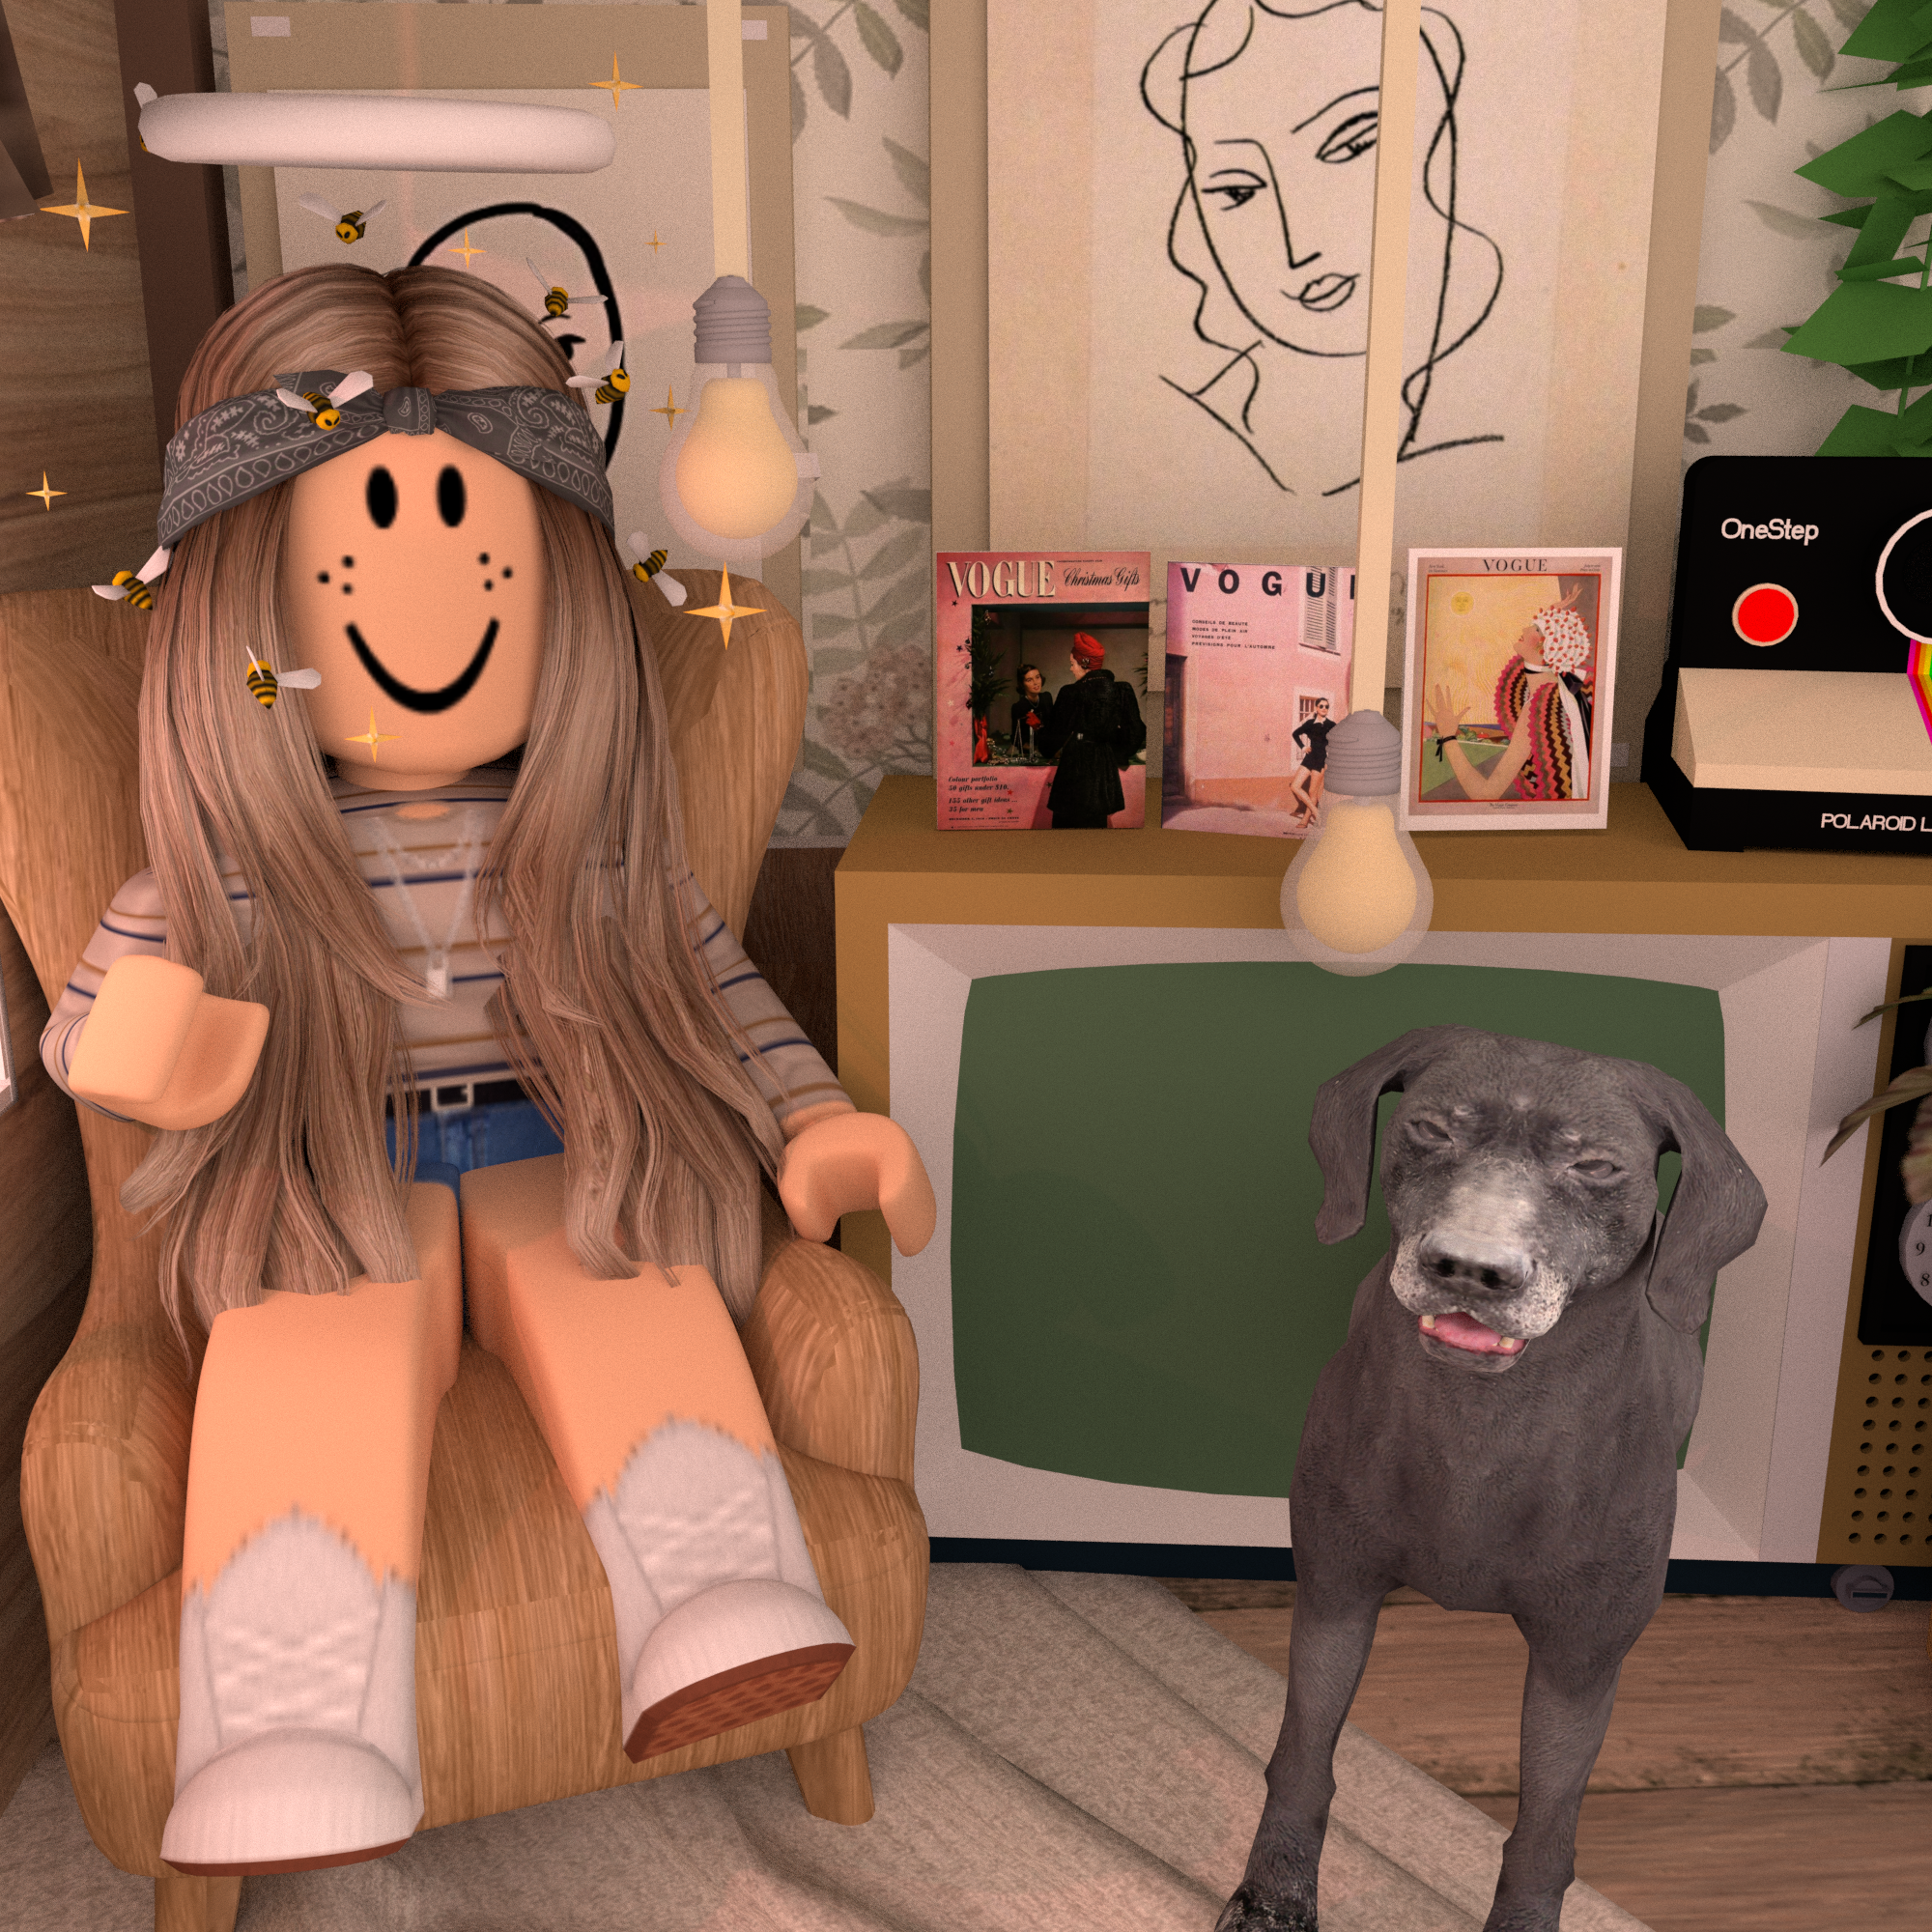 Download Roblox Aesthetic Girl With Dog Wallpaper